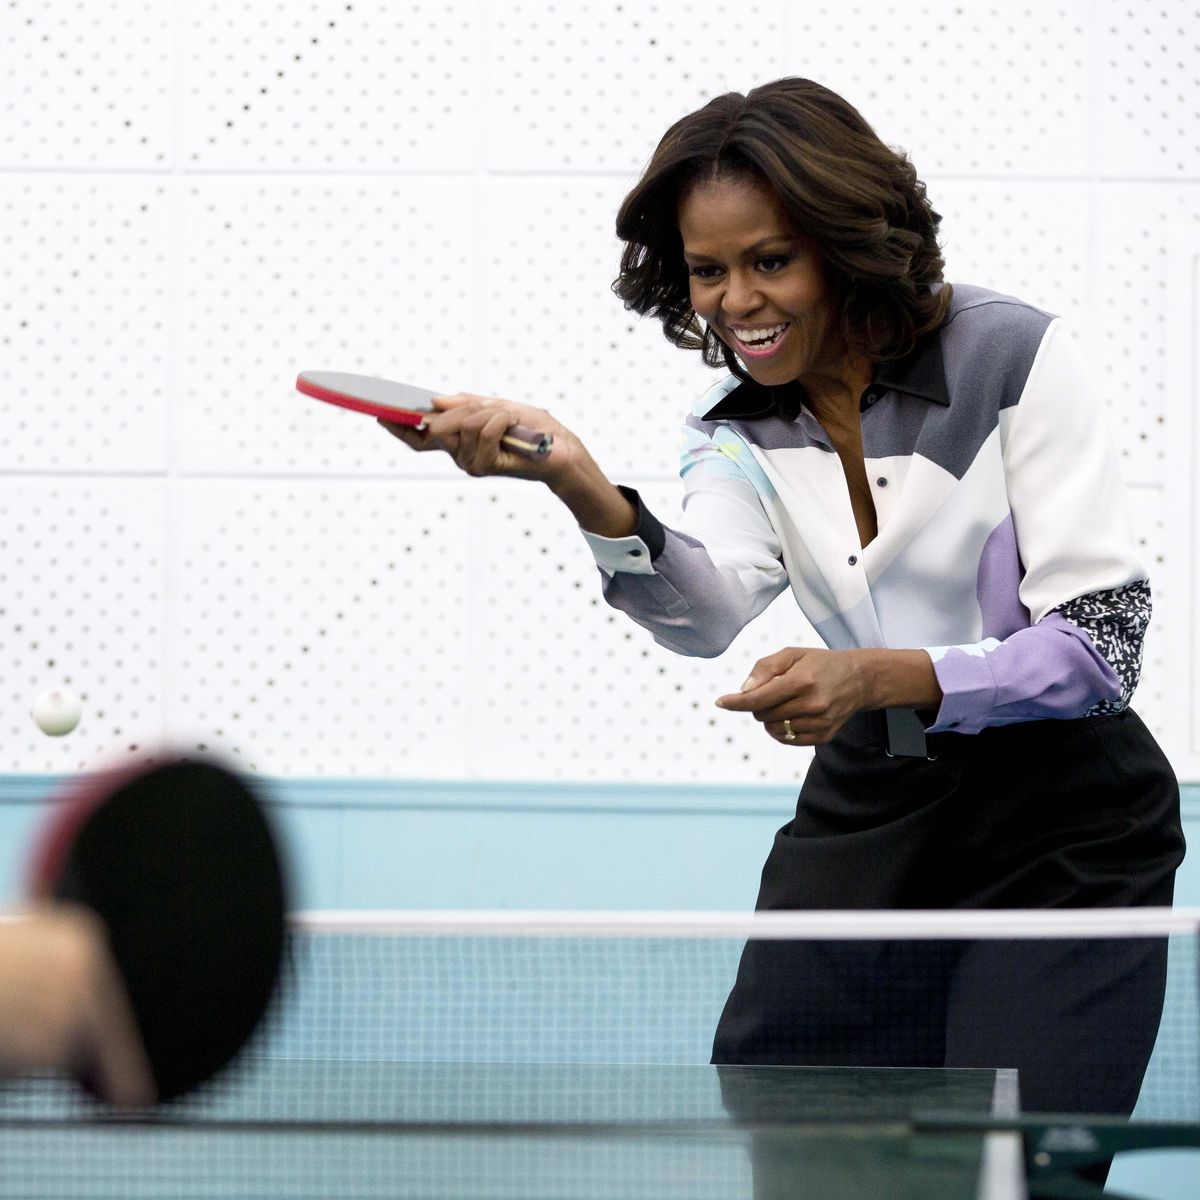 11 Best Ping Pong Paddles 2020 | The Strategist